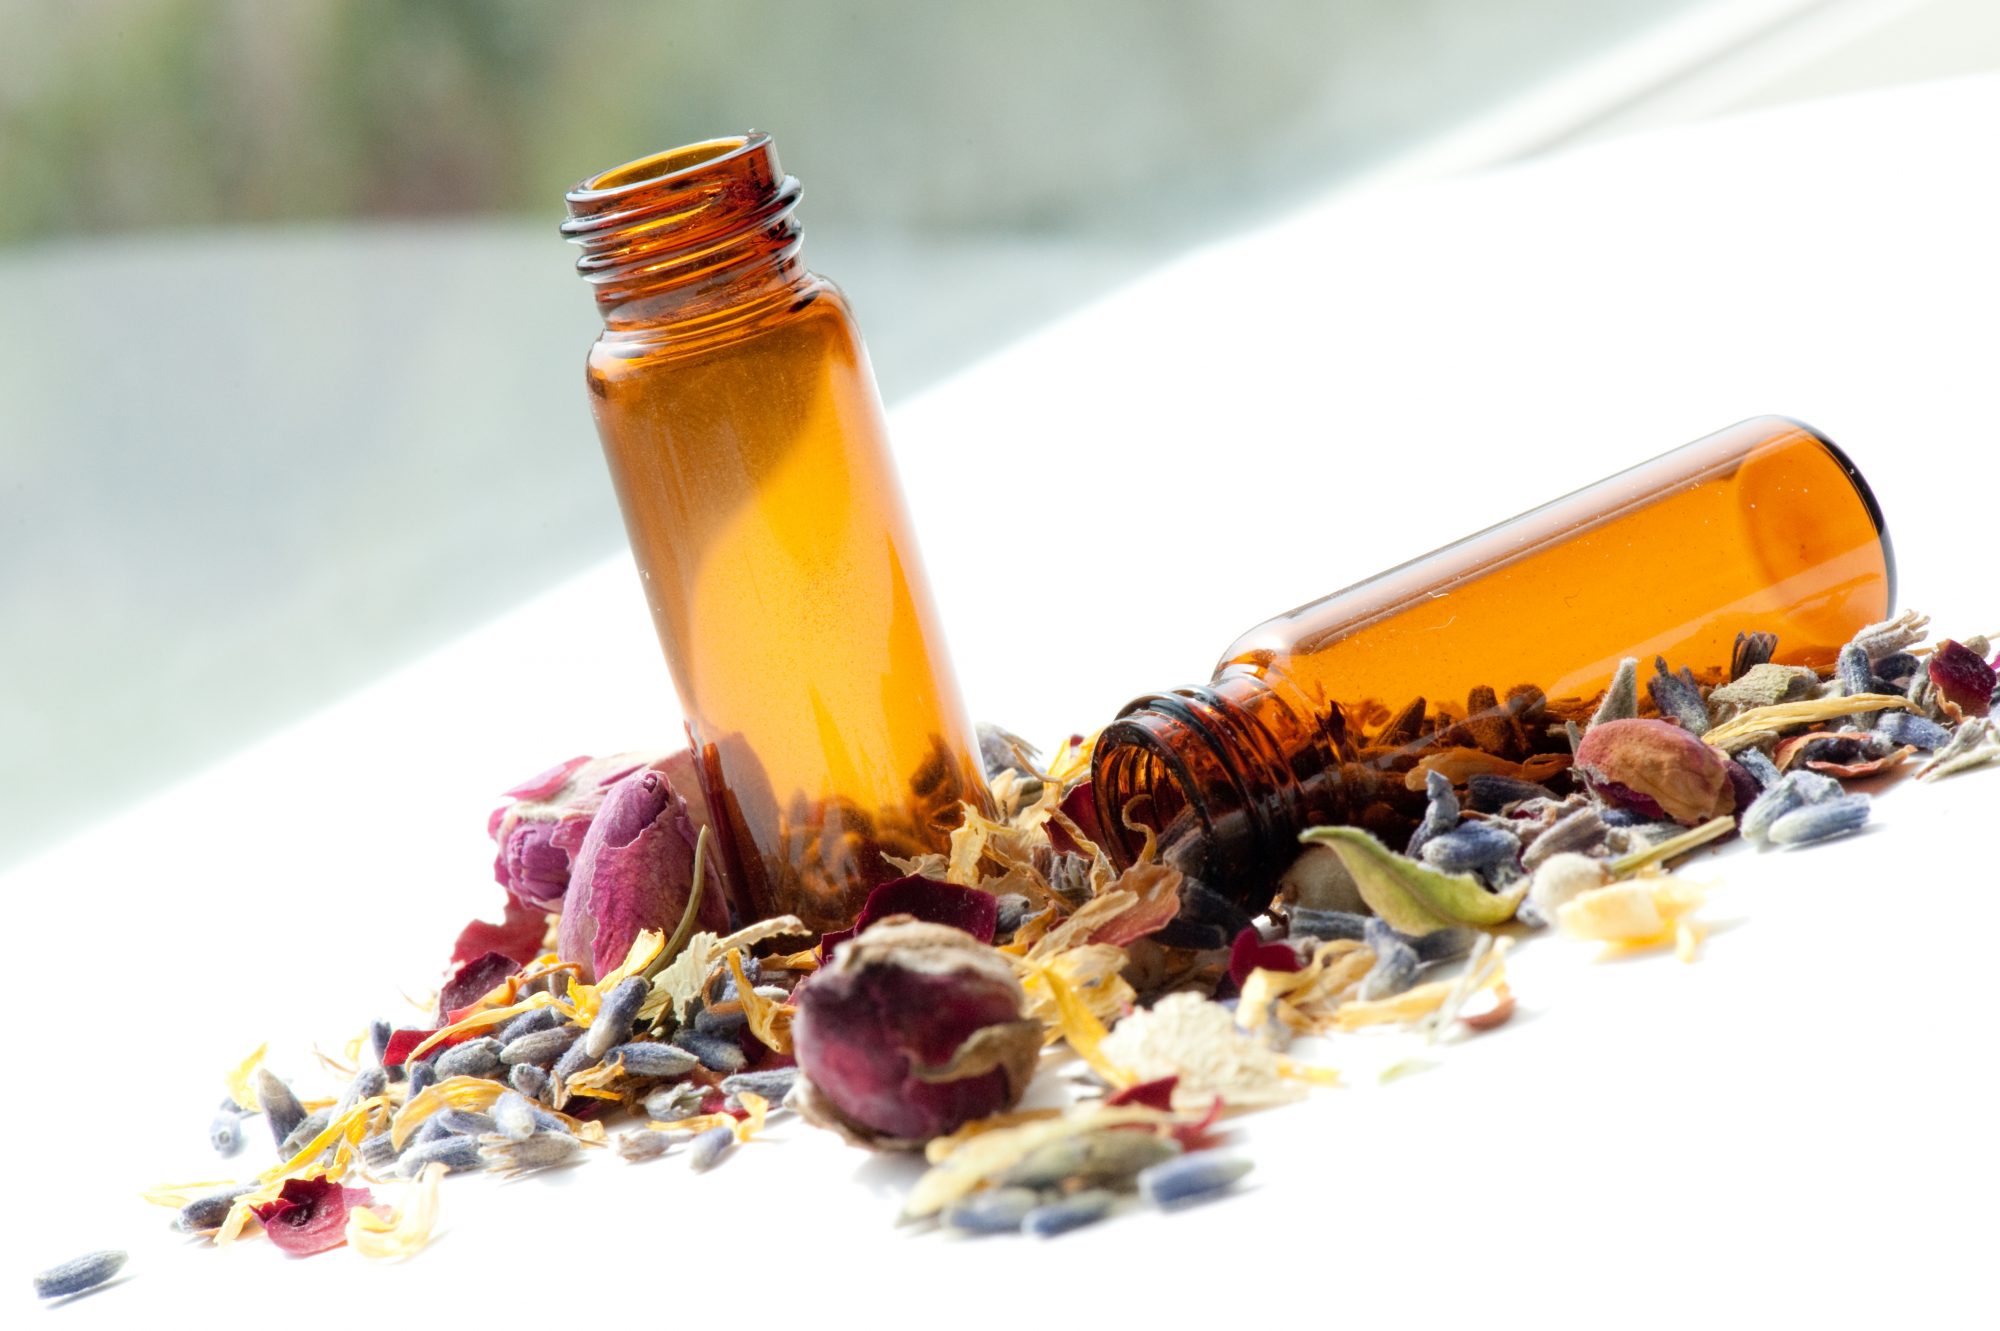 What are the mental and physical health benefits of essential oils?